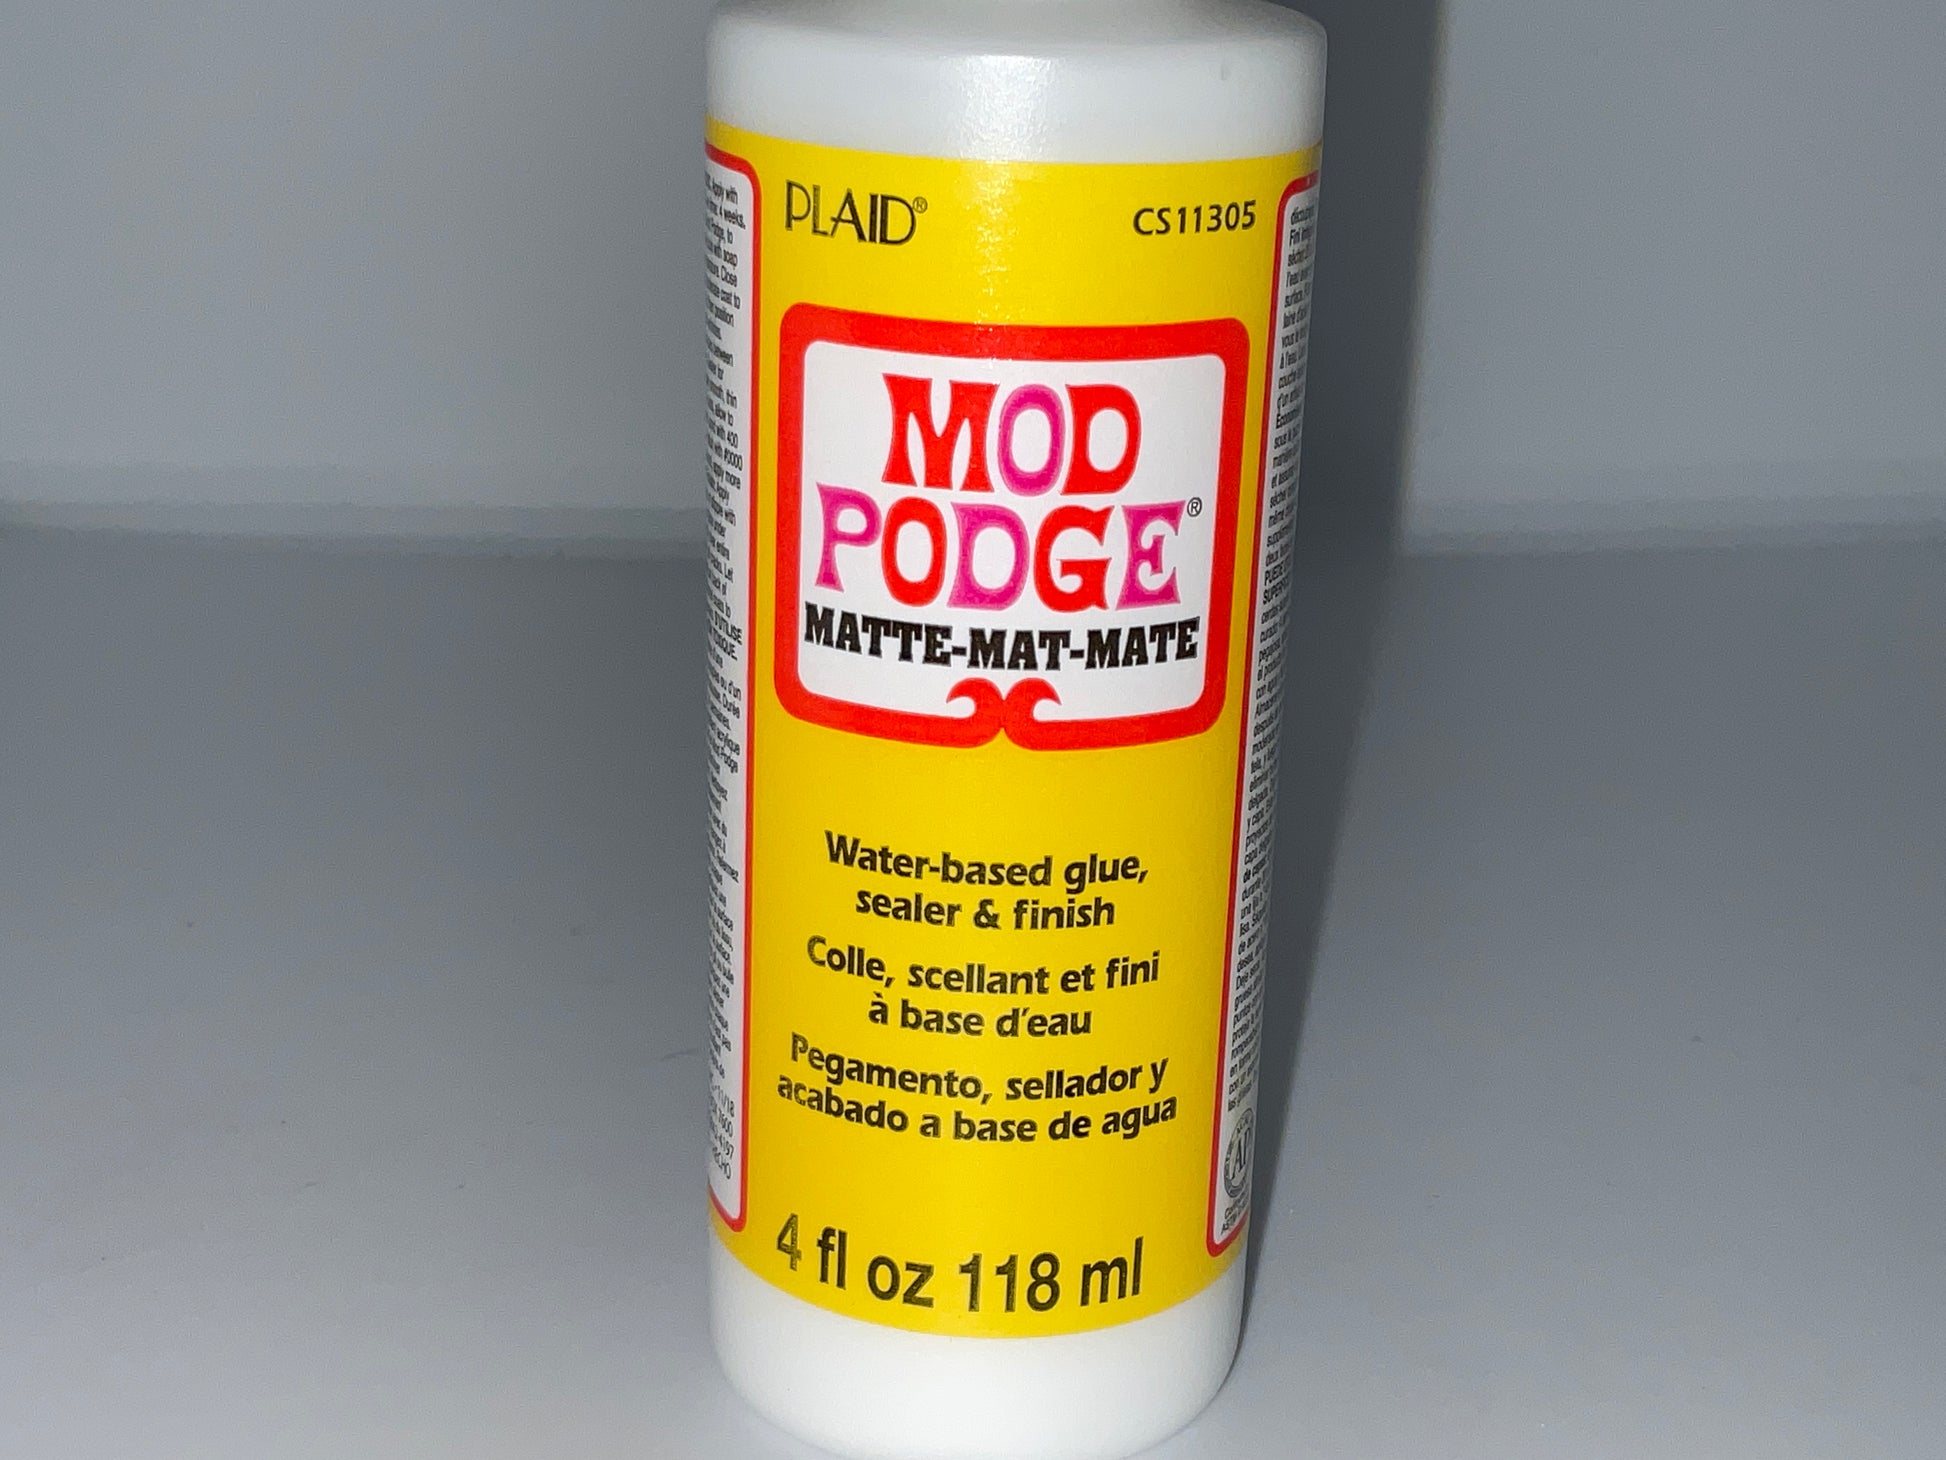 Mod Podge Water-based glue, sealer and finish – Me Time Specialty